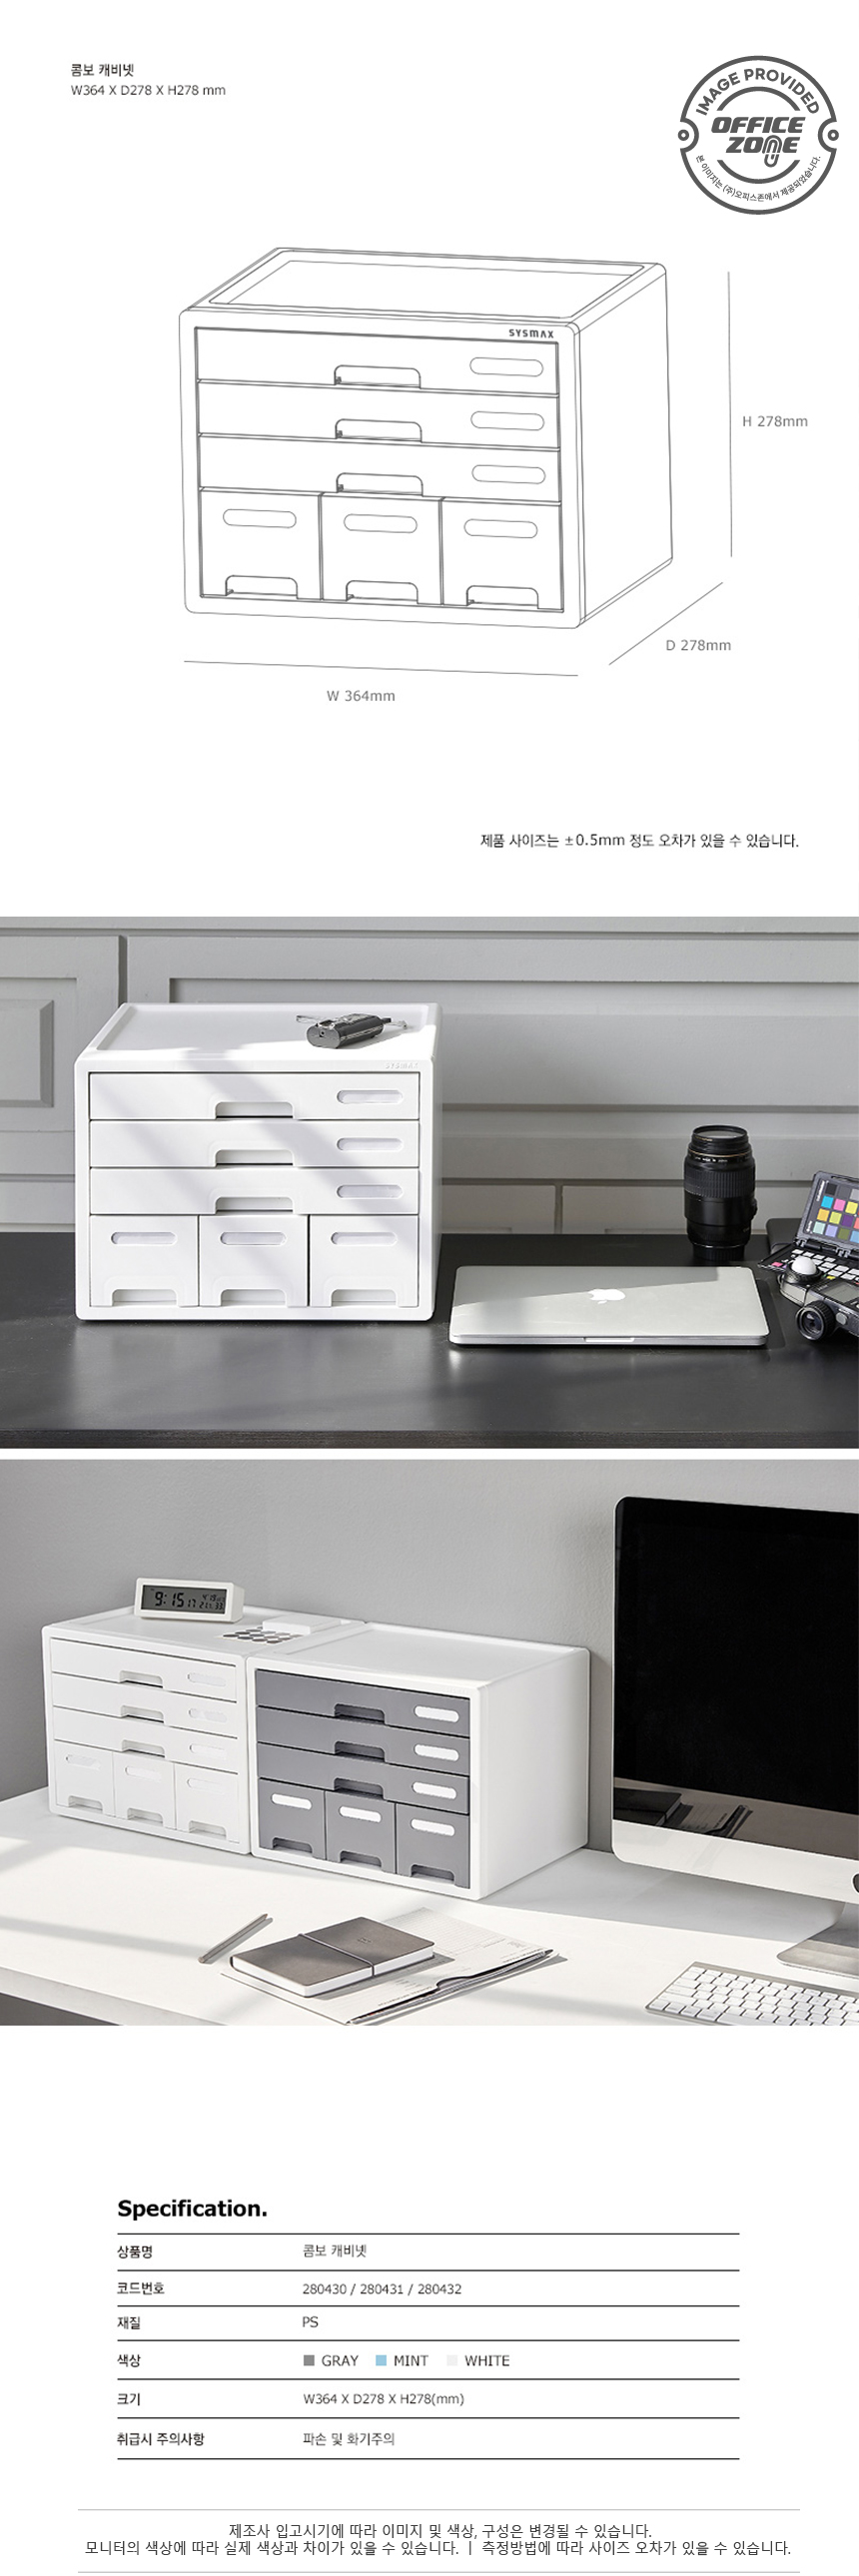 sysmax-combo-cabinet-02.jpg